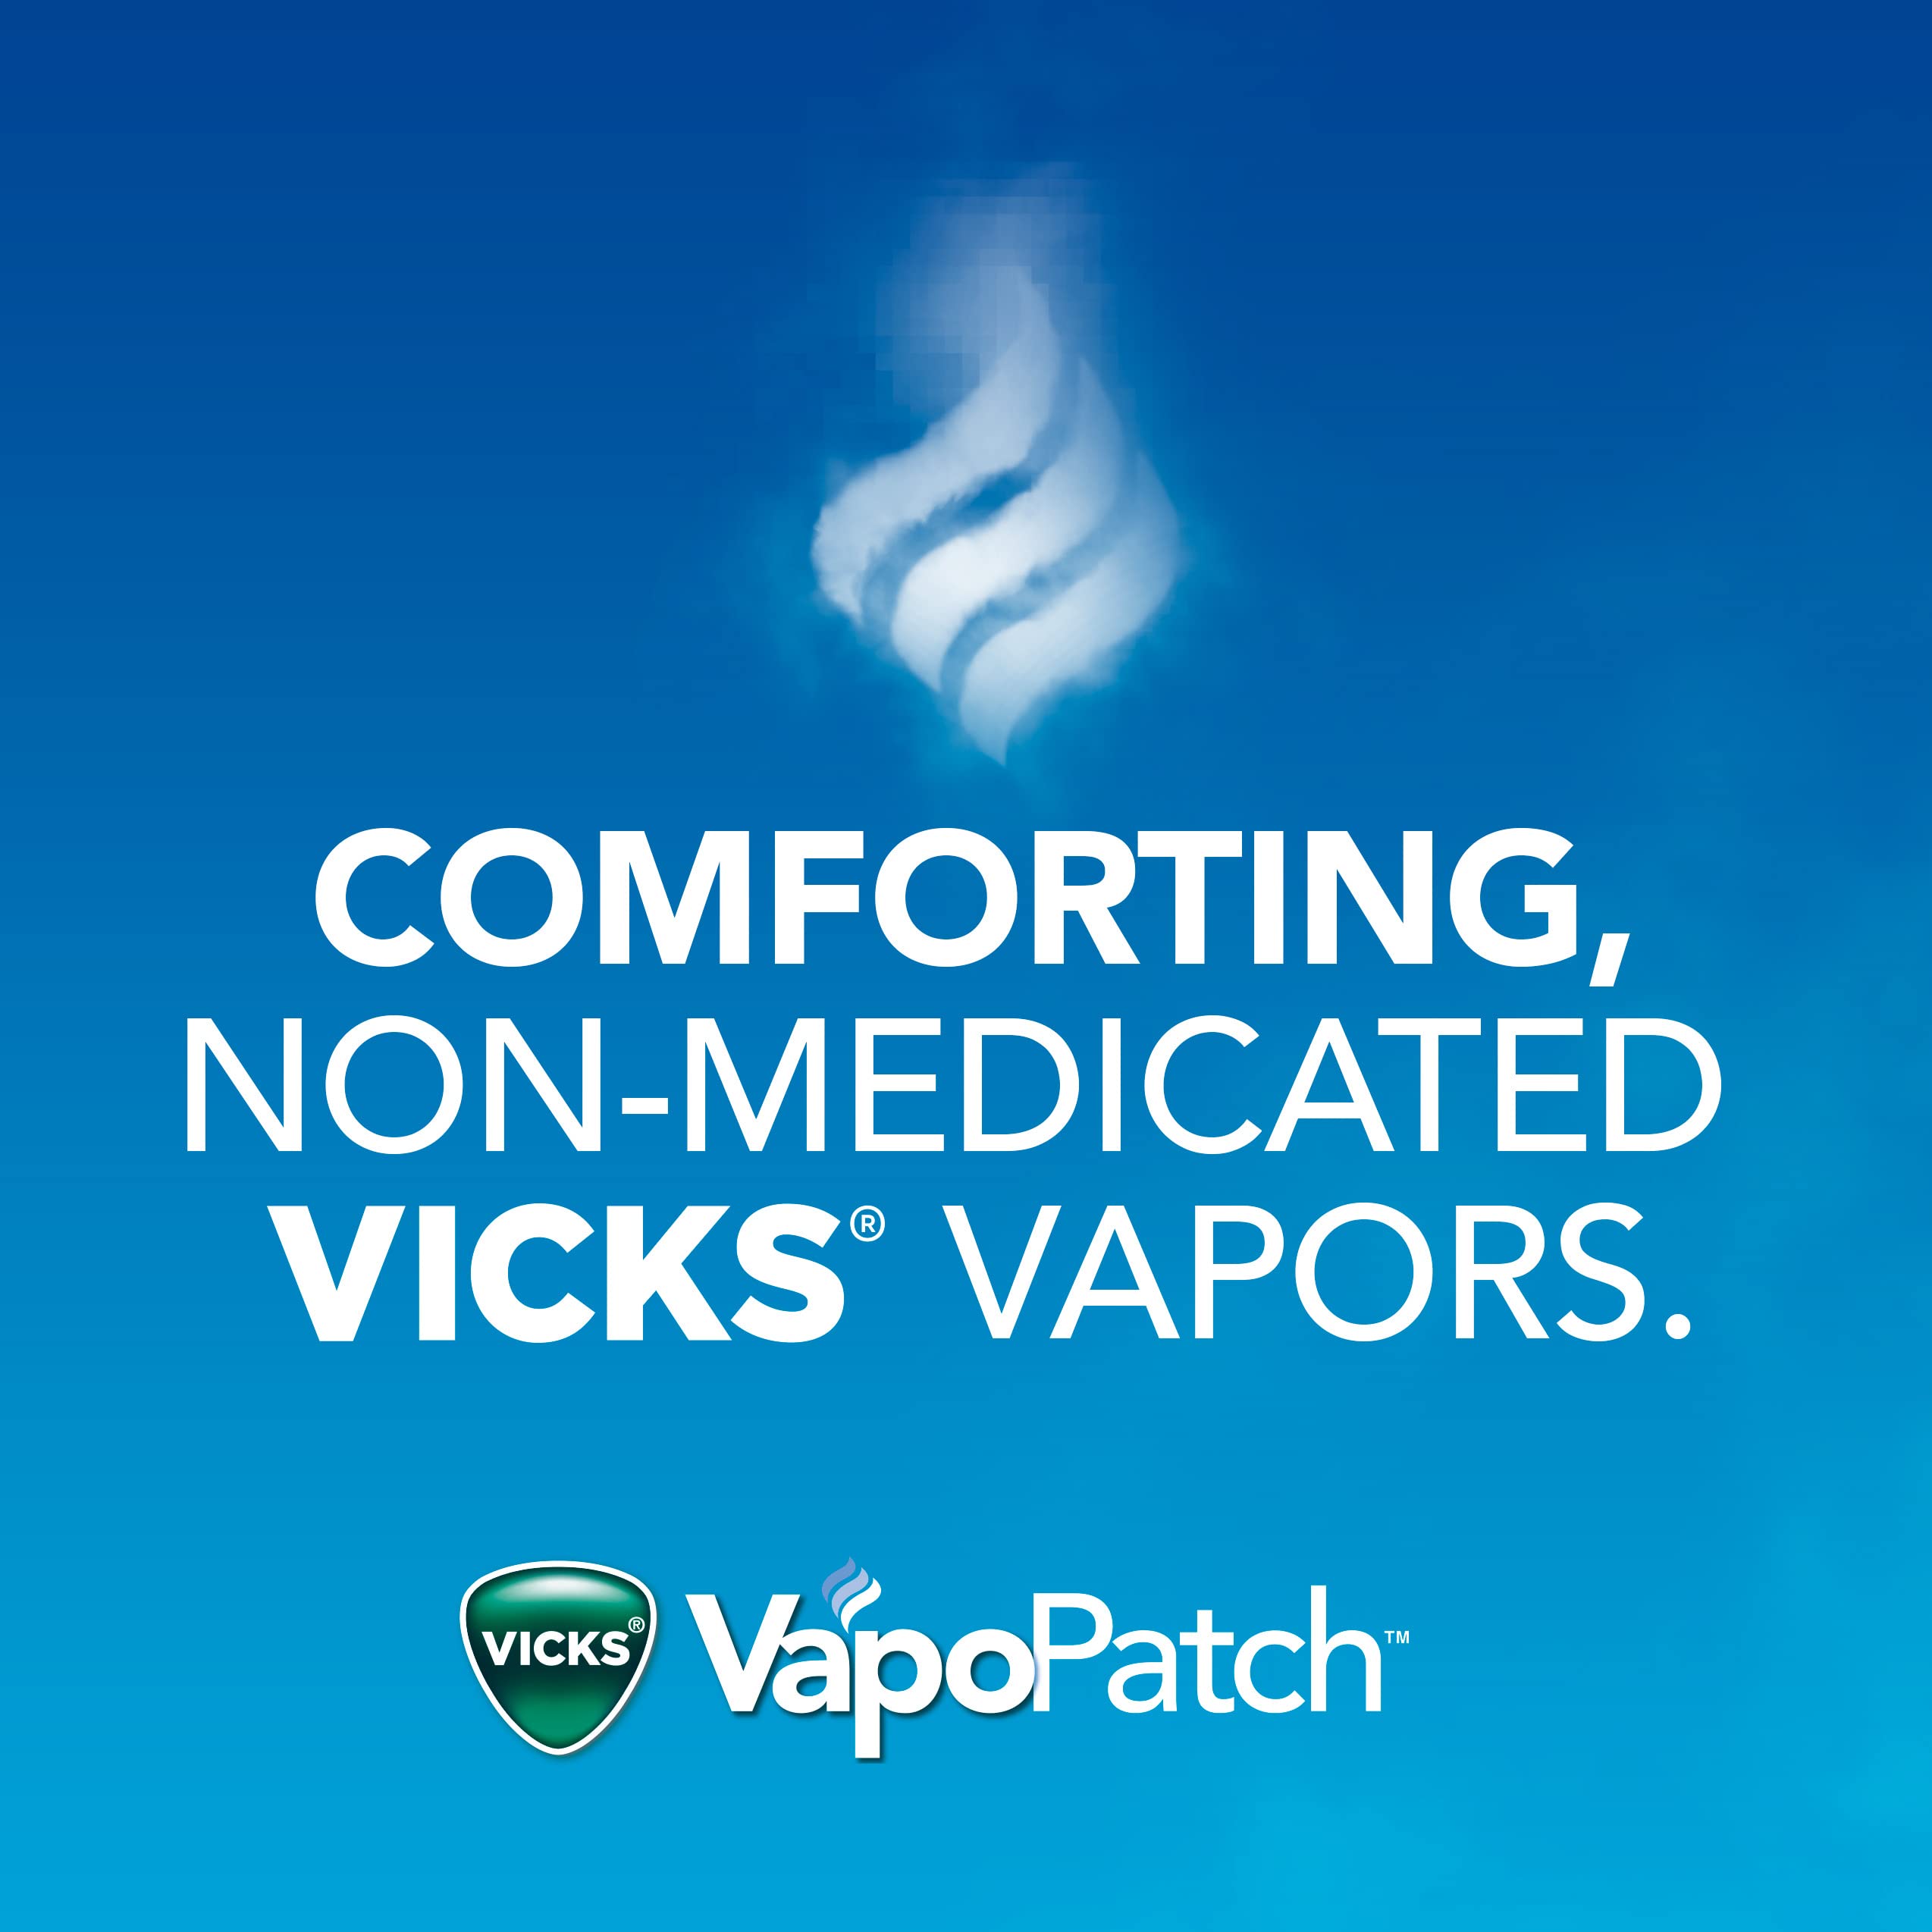 Vicks VapoPatch, Wearable Mess-Free Aroma Patch, Soothing & Comforting Non-Medicated Vicks Vapors, For Adults & Children Ages 6+, 5ct (2 pack)